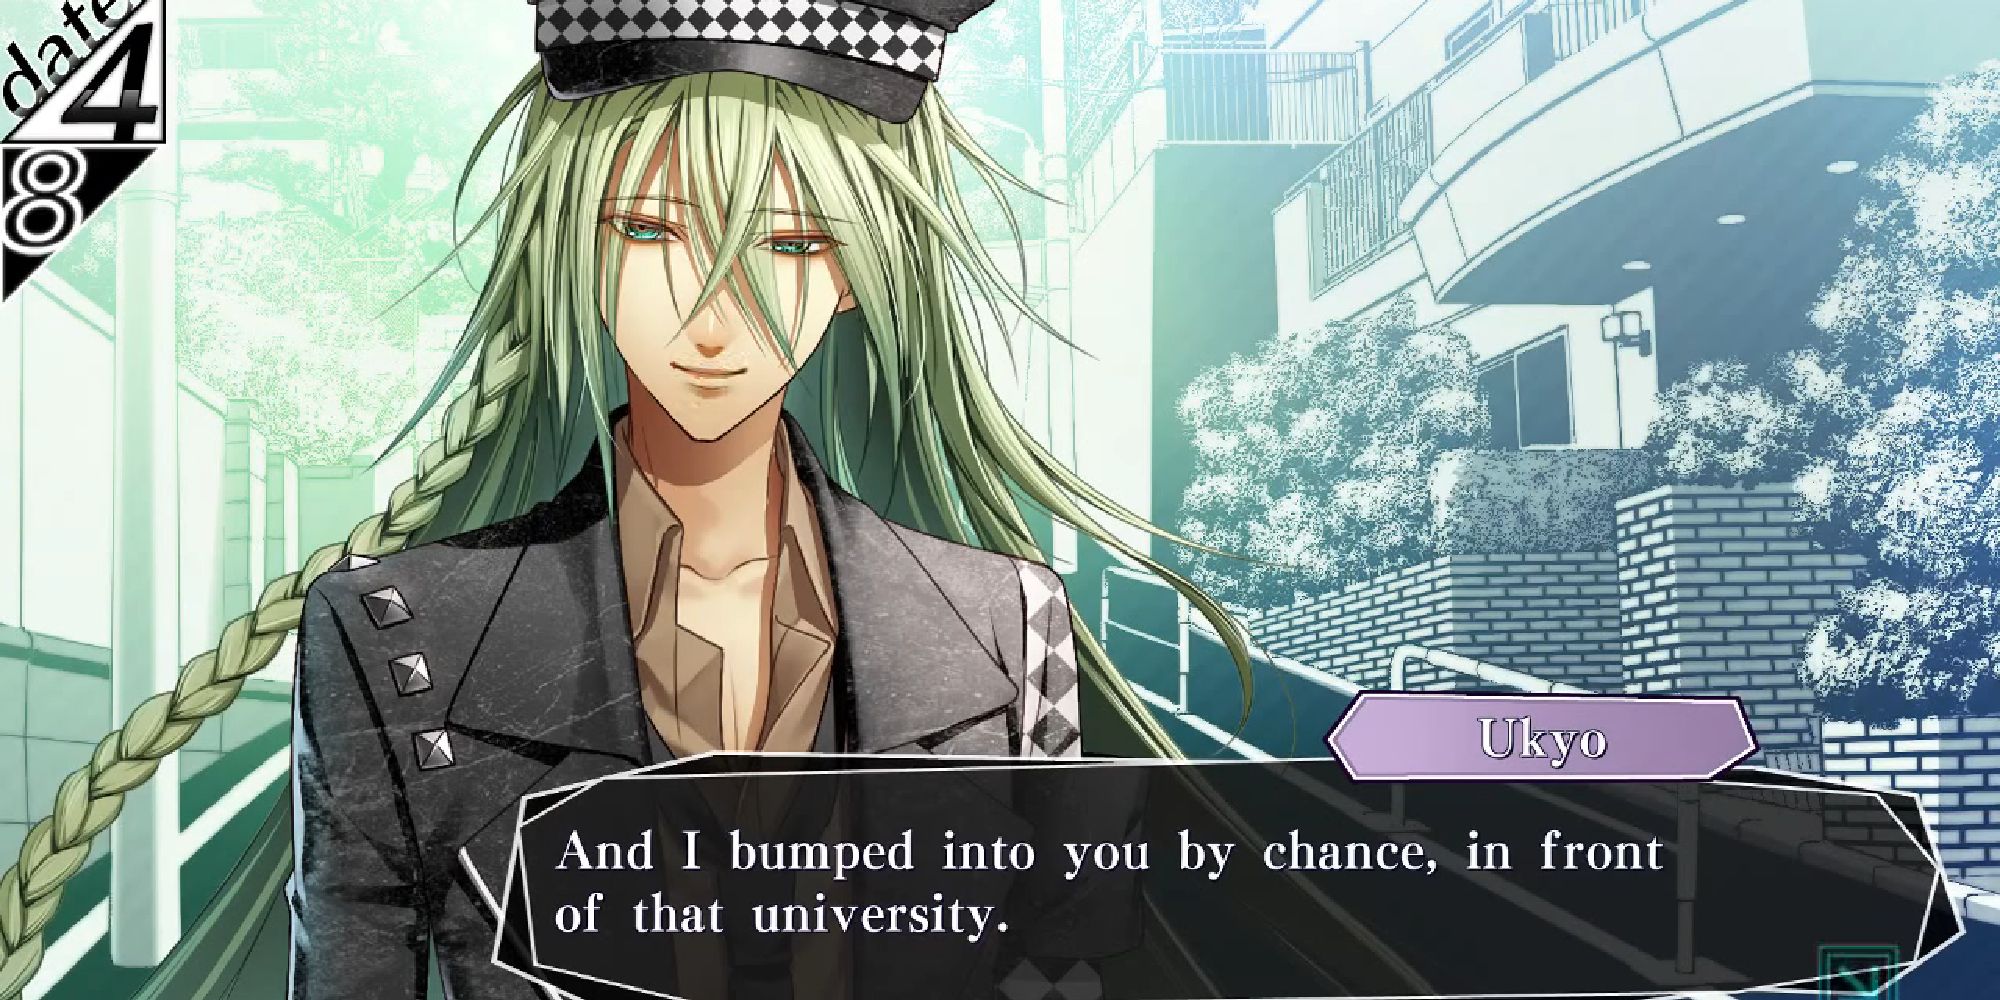 talking to ukyo in the street